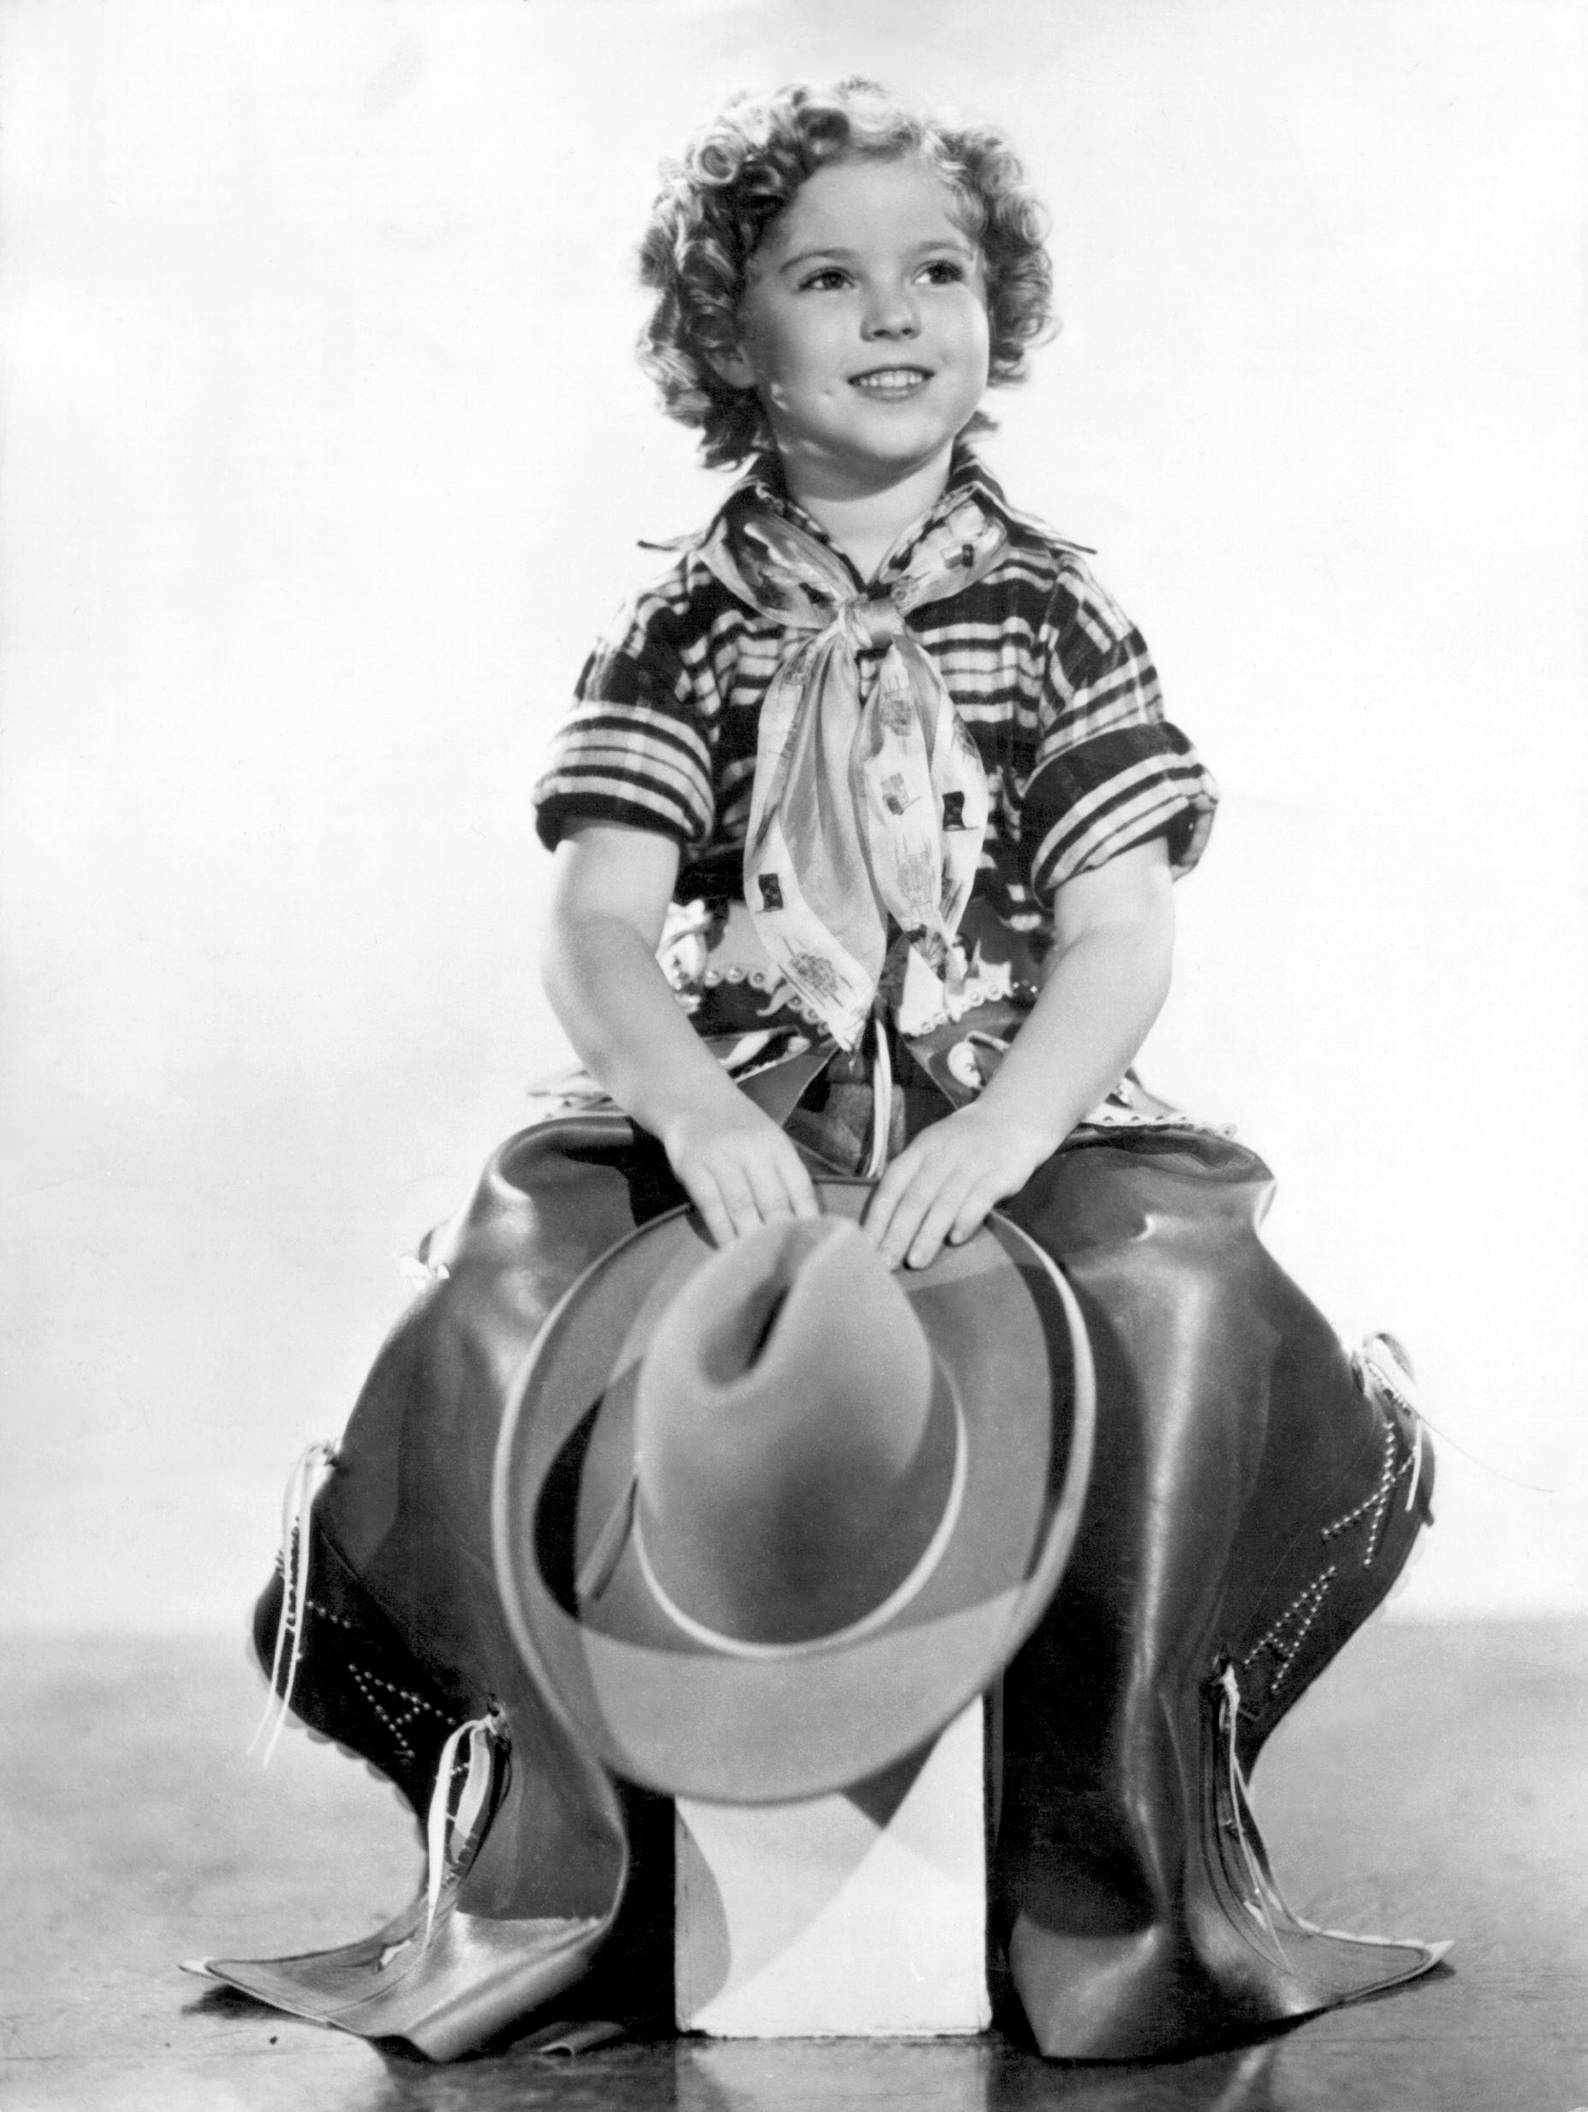 Shirley Temple as a Cowgirl